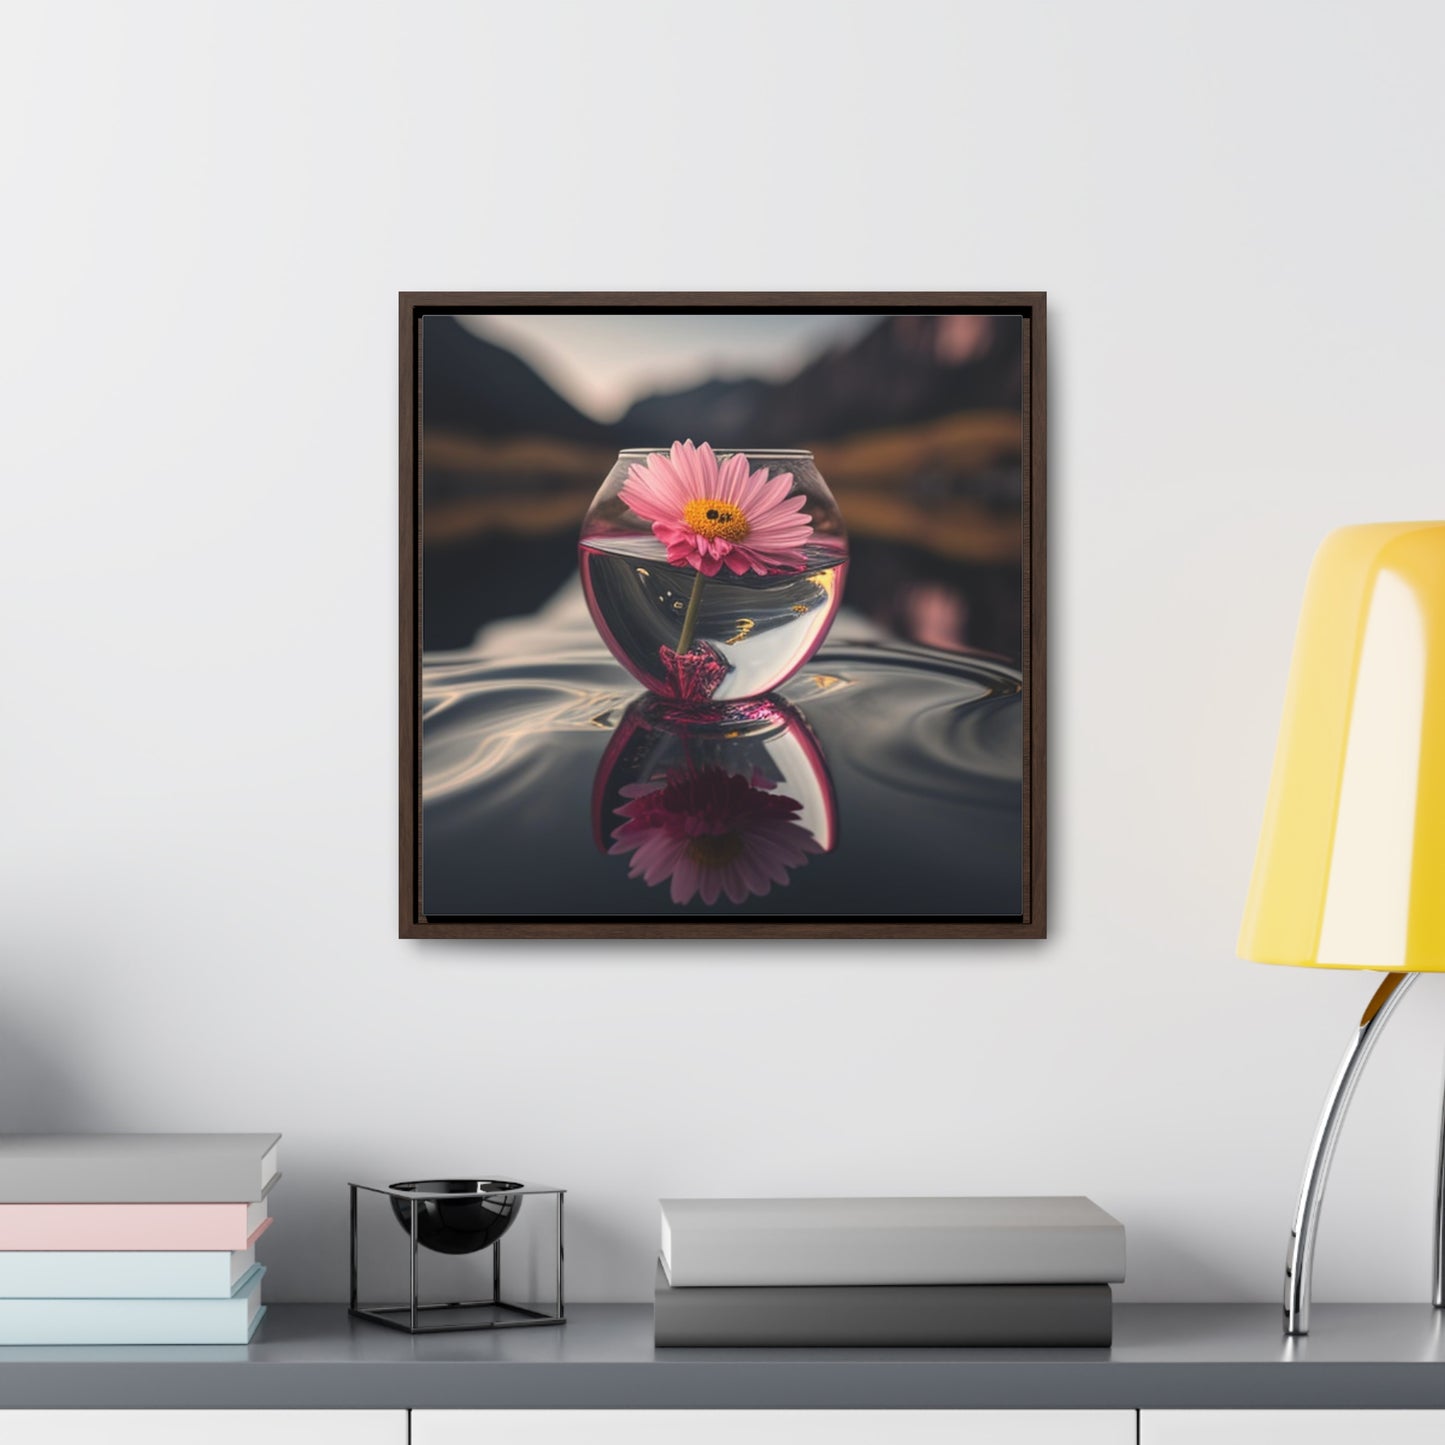 Gallery Canvas Wraps, Square Frame Pink Daisy 1